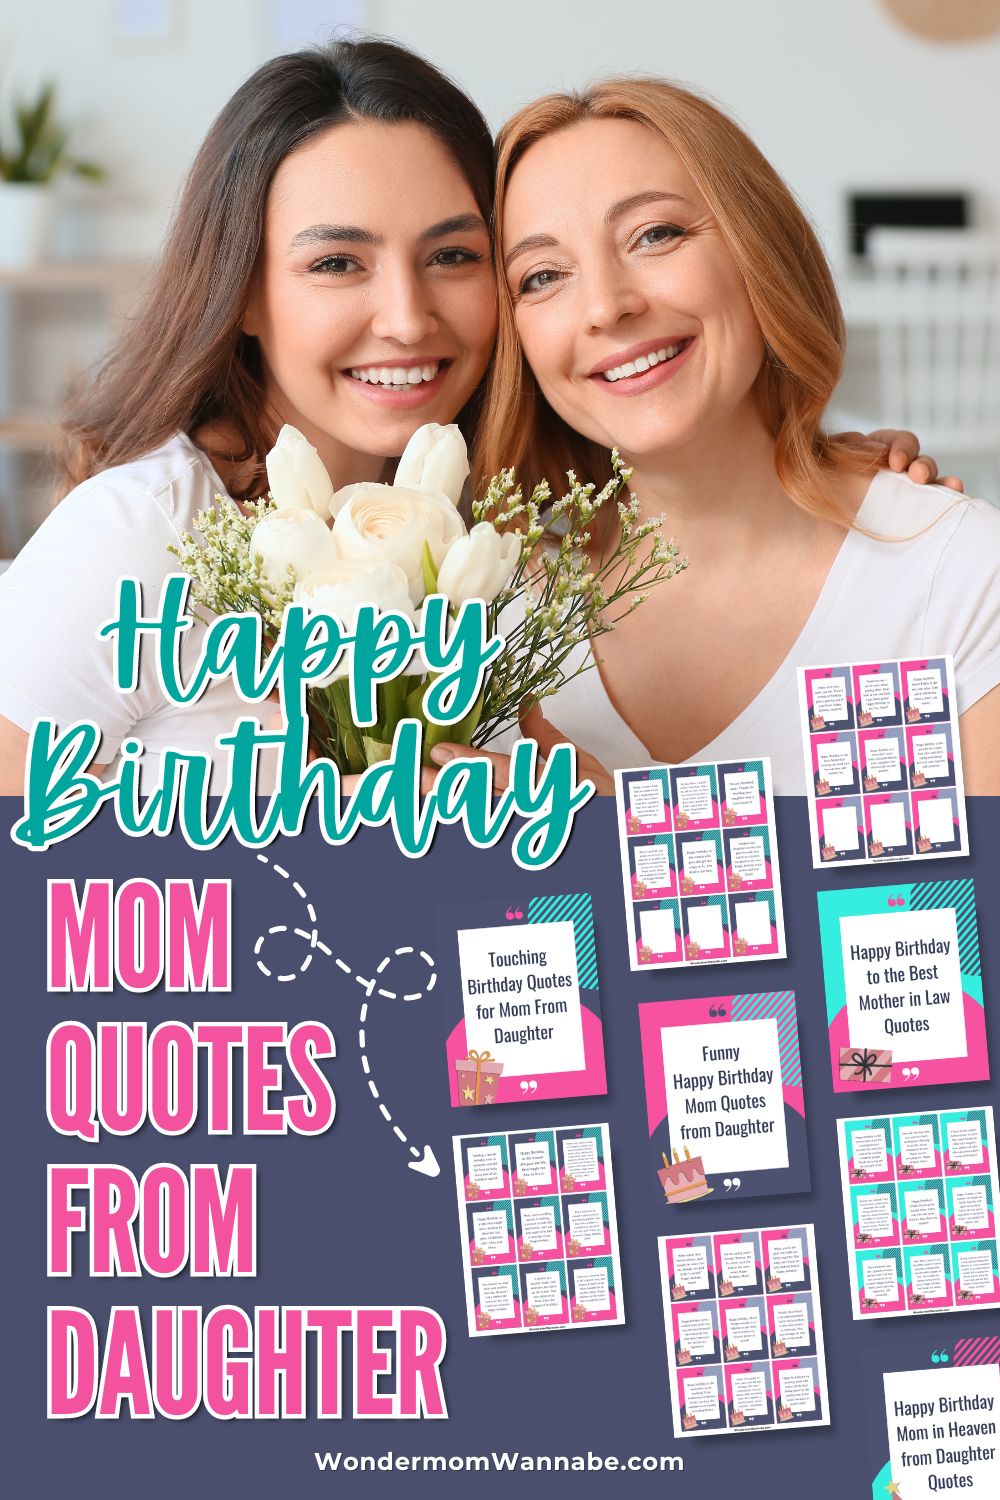 Happy birthday mom! Here are heartwarming quotes from your loving daughter.